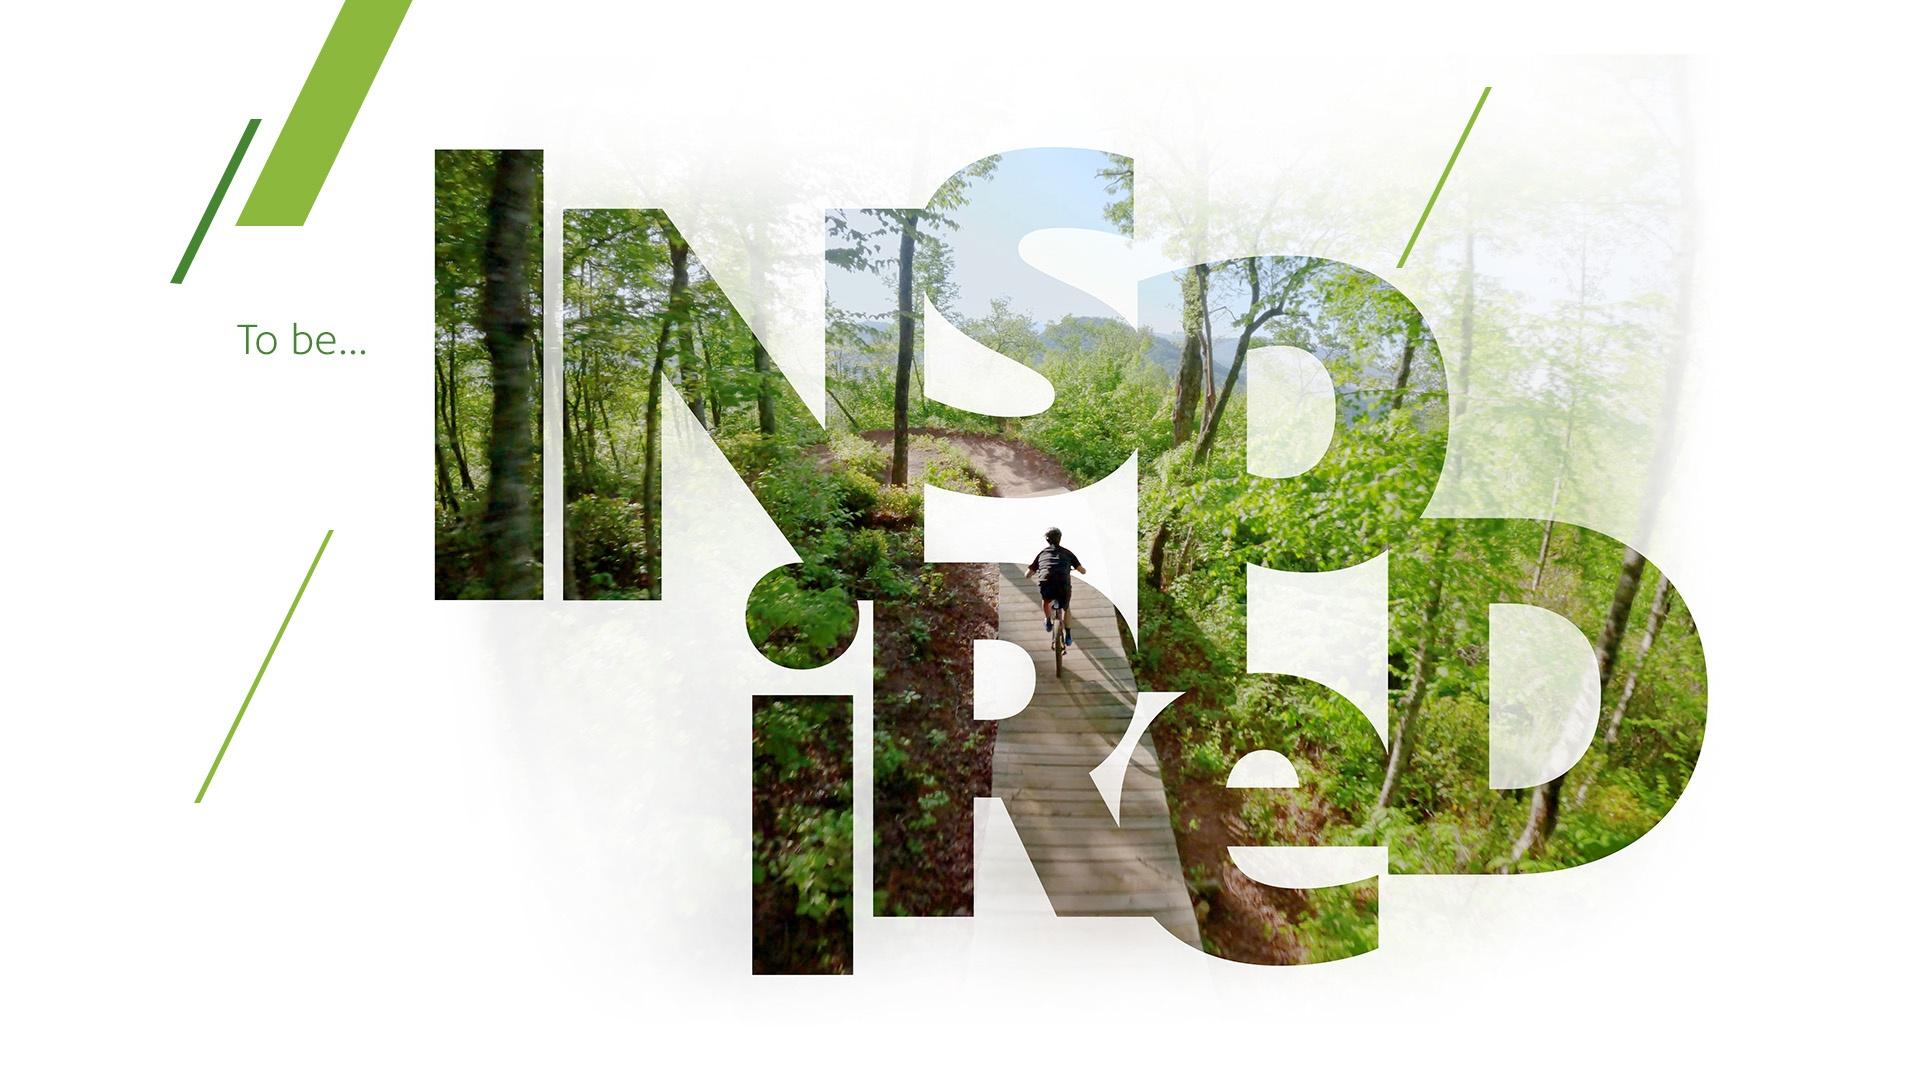 Block letters spelling out "INSPIRED" with an image of a bicyclist on a trail. within them.